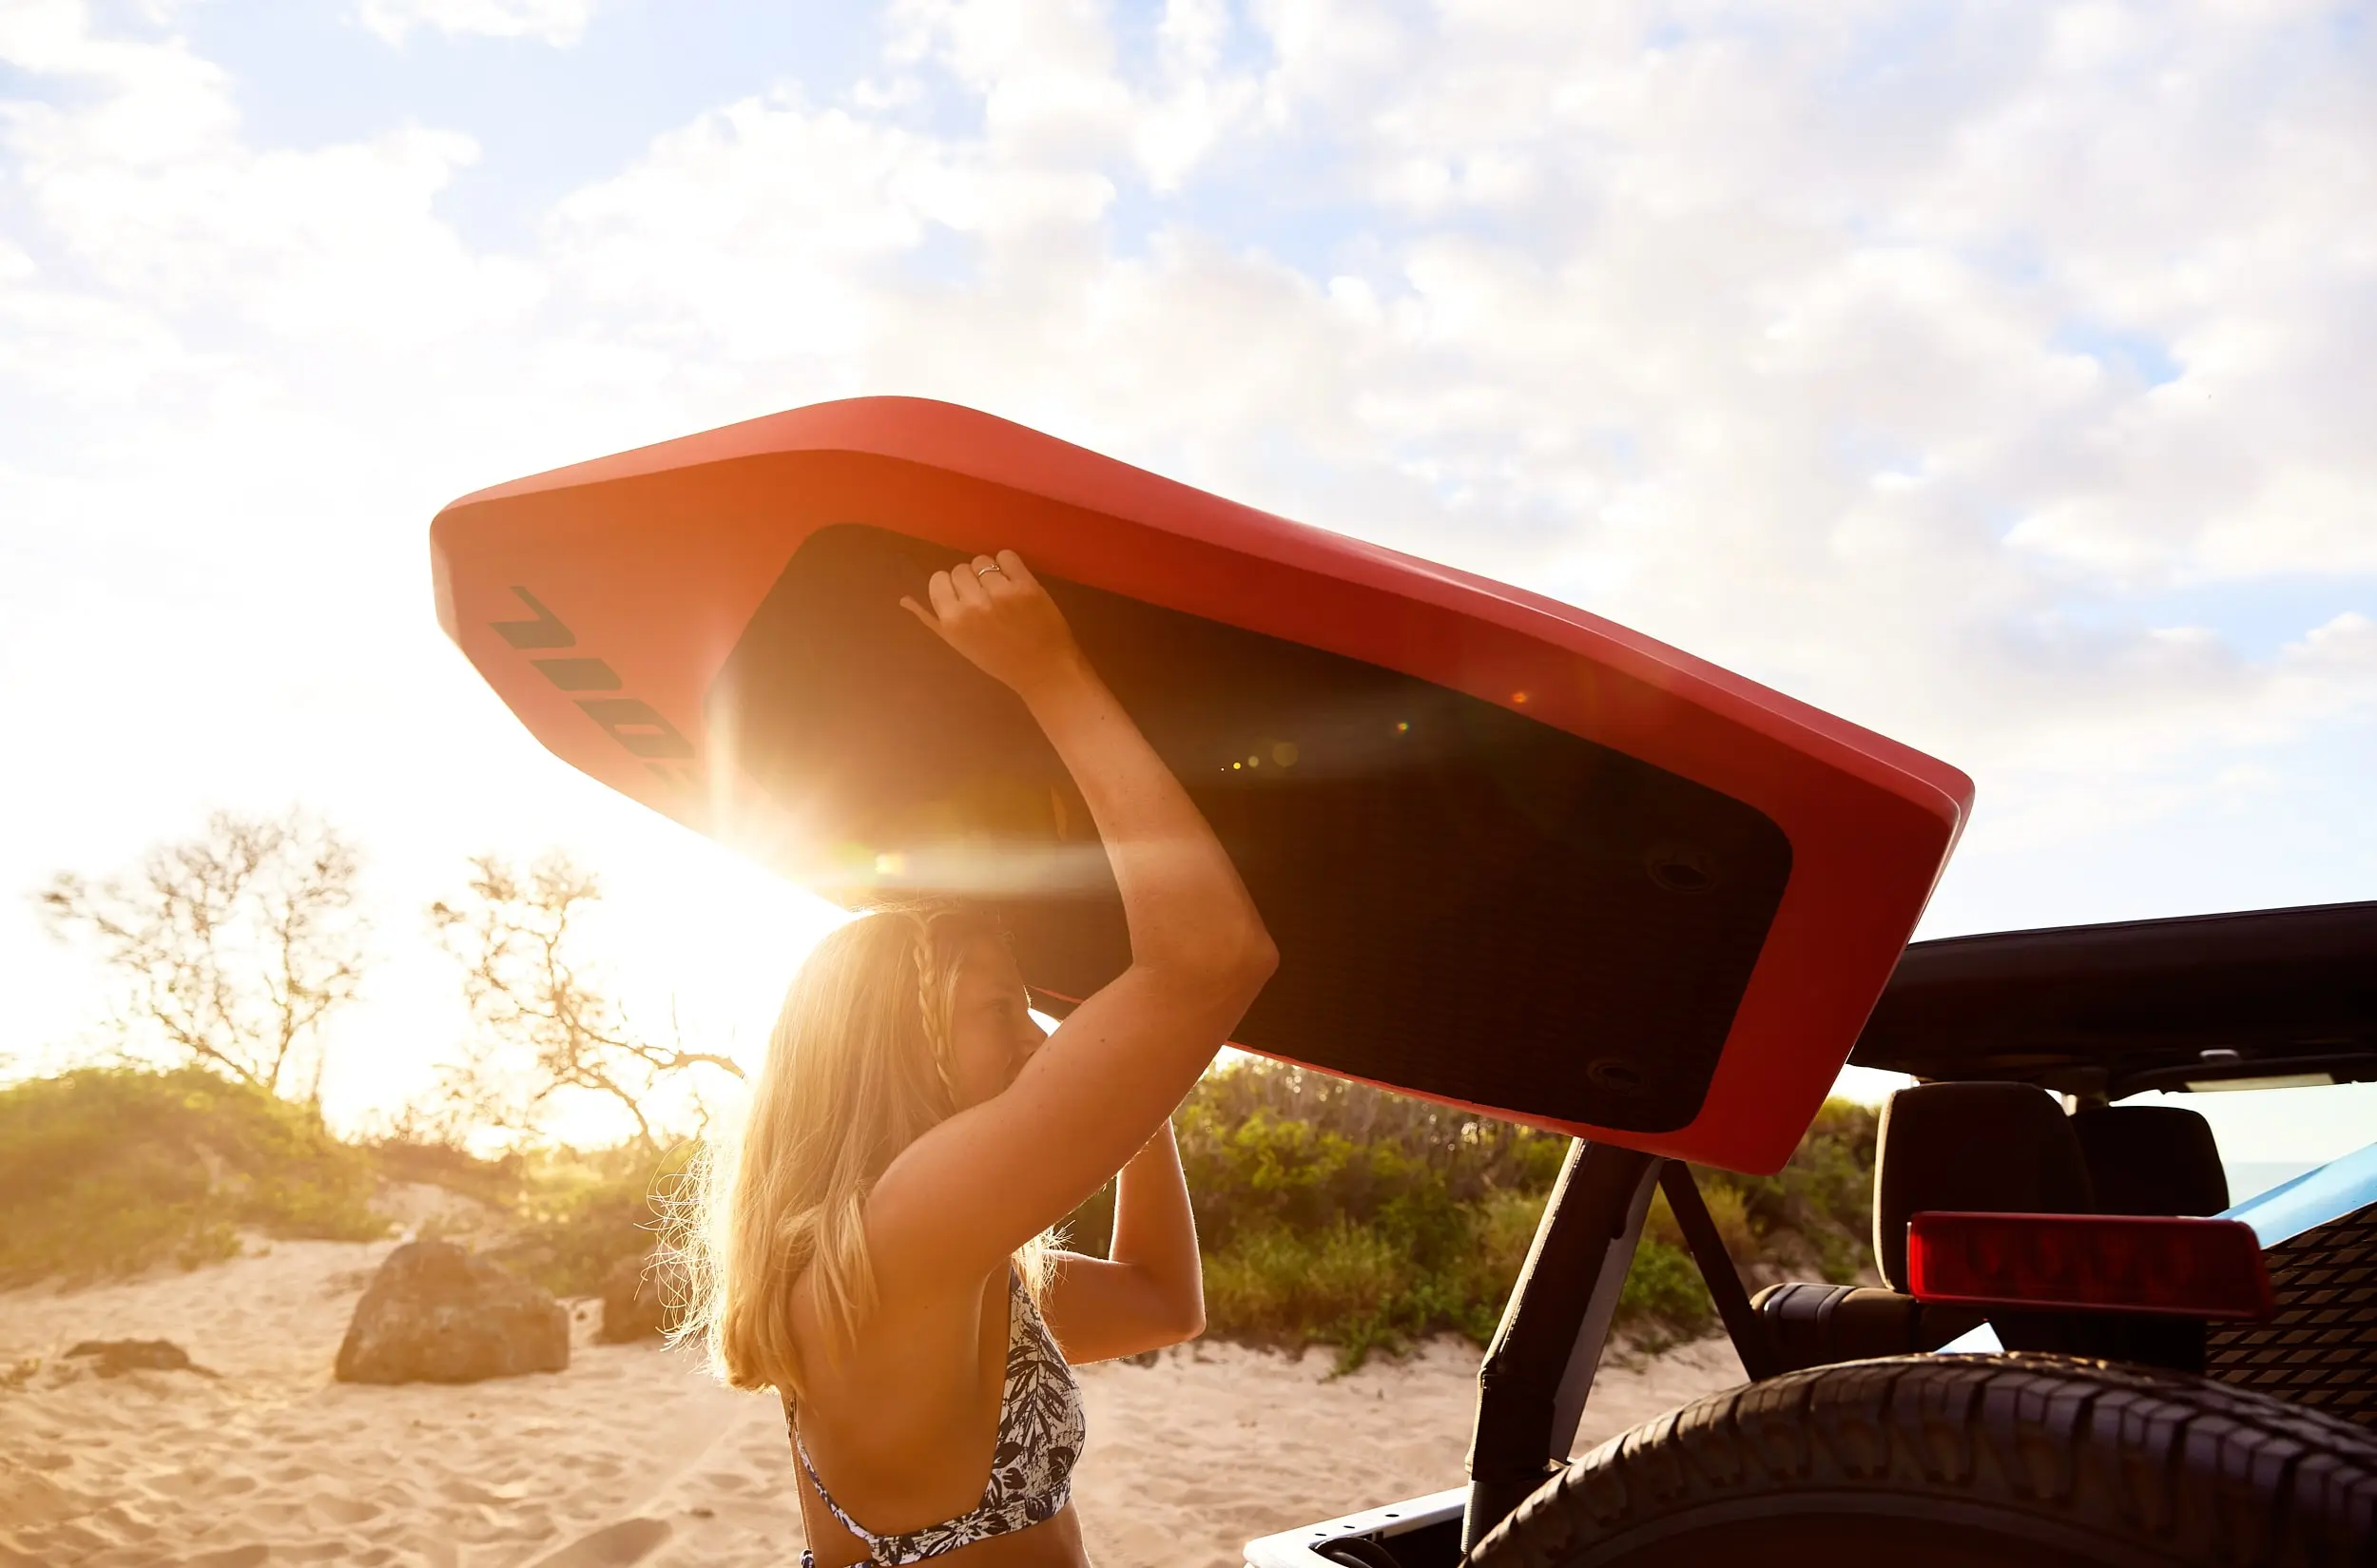 A woman lifting a FOIL board into the back of a jeep. Sunshine is piercing into the foreground from the background, and beach vegetation and sand are visible throughout the image.